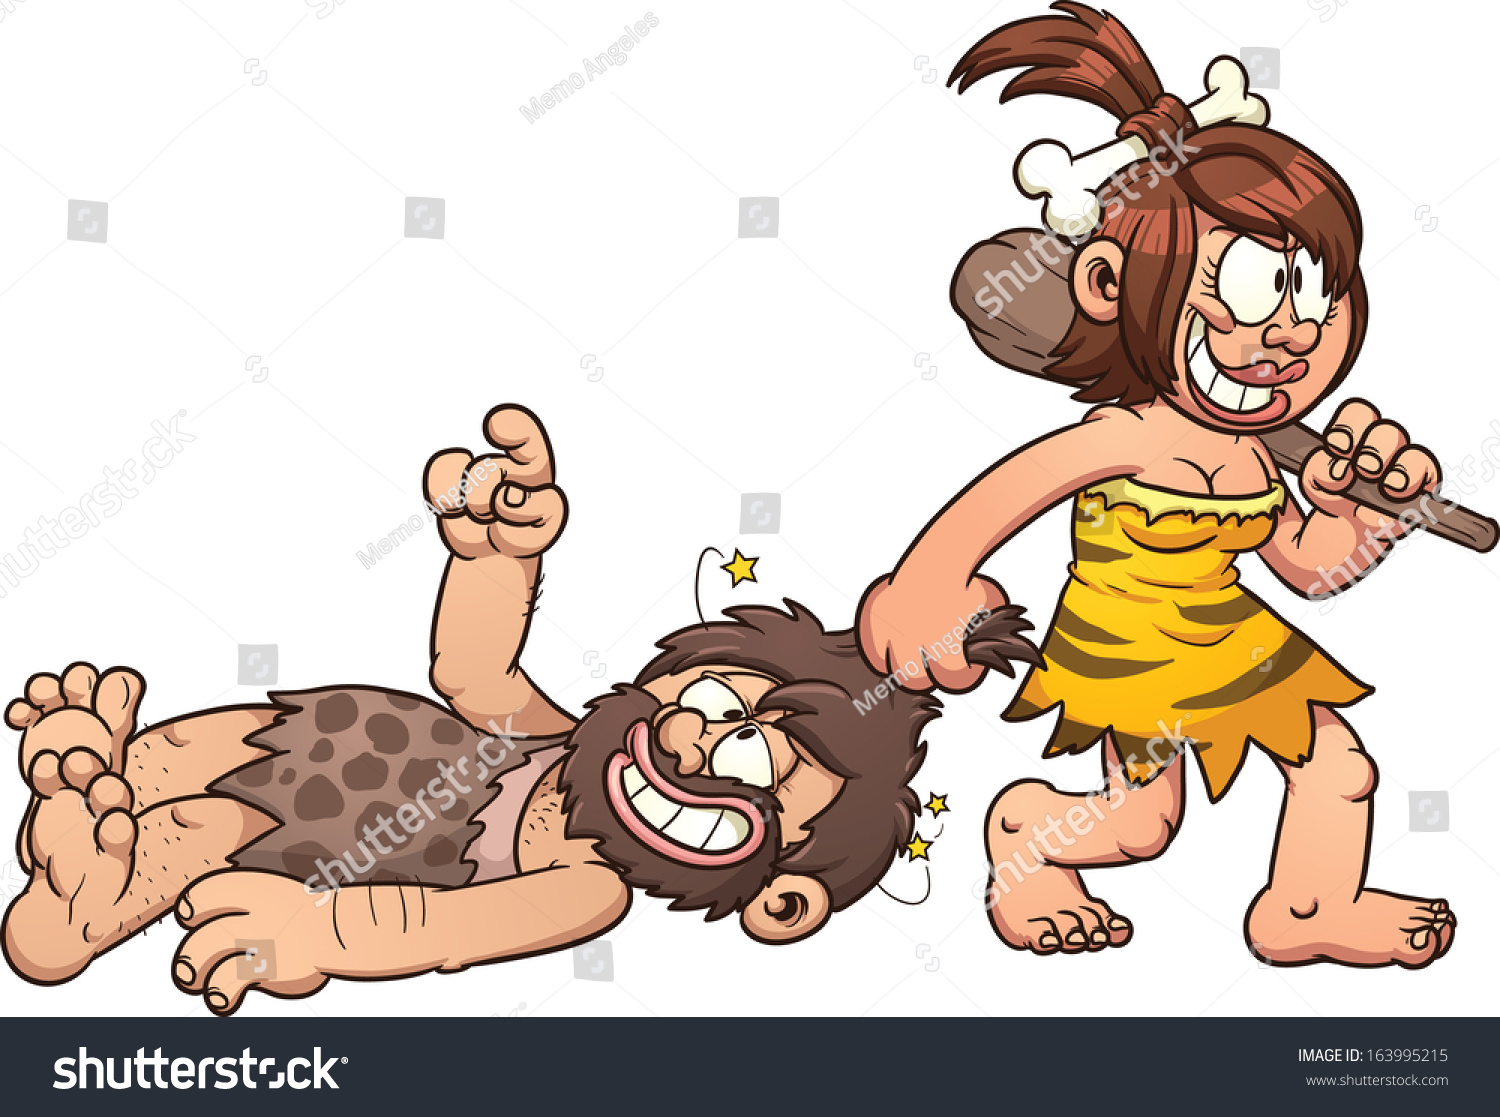 stock-vector-cave-woman-dragging-a-caveman-clip-art-vector-cartoon-illustration-with-simple-gradients-all-in-a-163995215.jpg